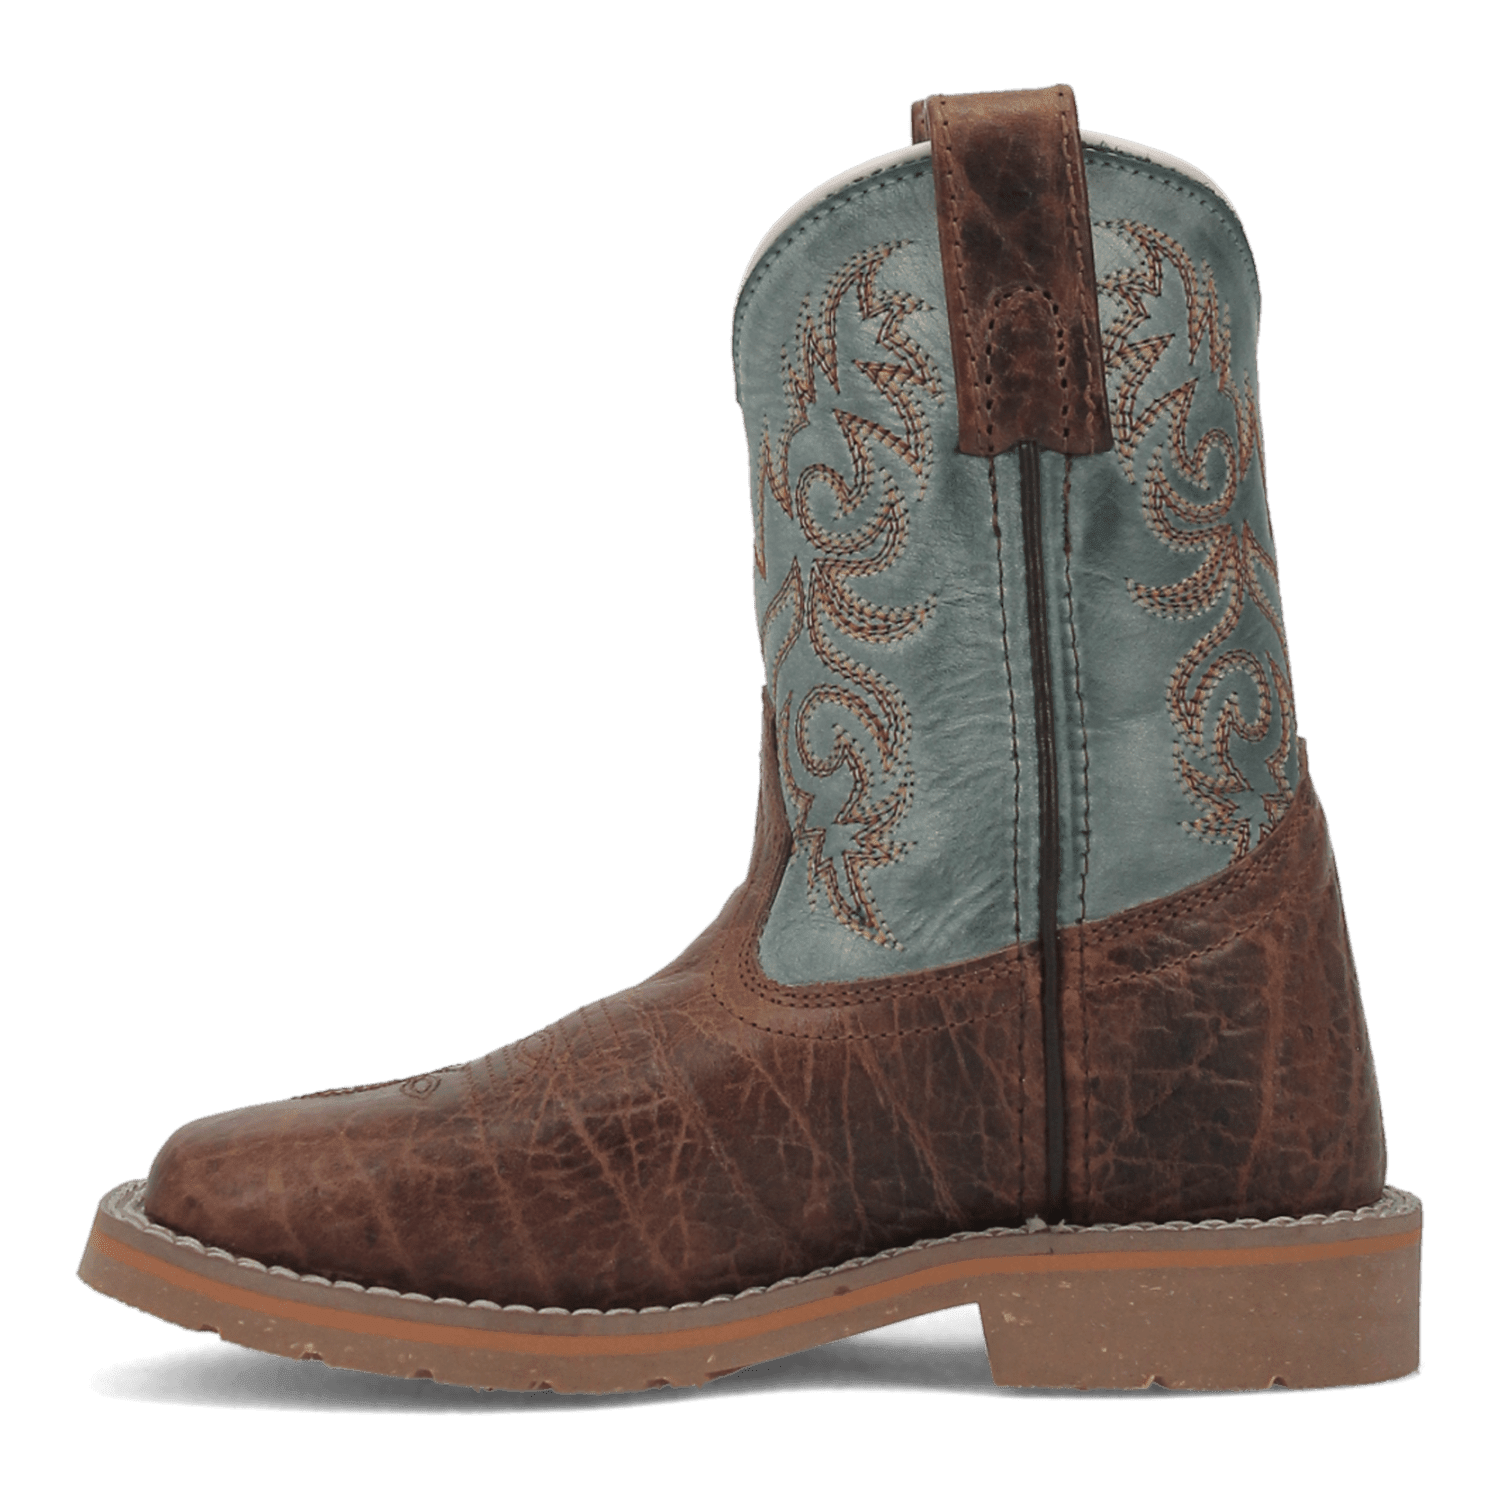 LIL' BISBEE LEATHER YOUTH BOOT Image